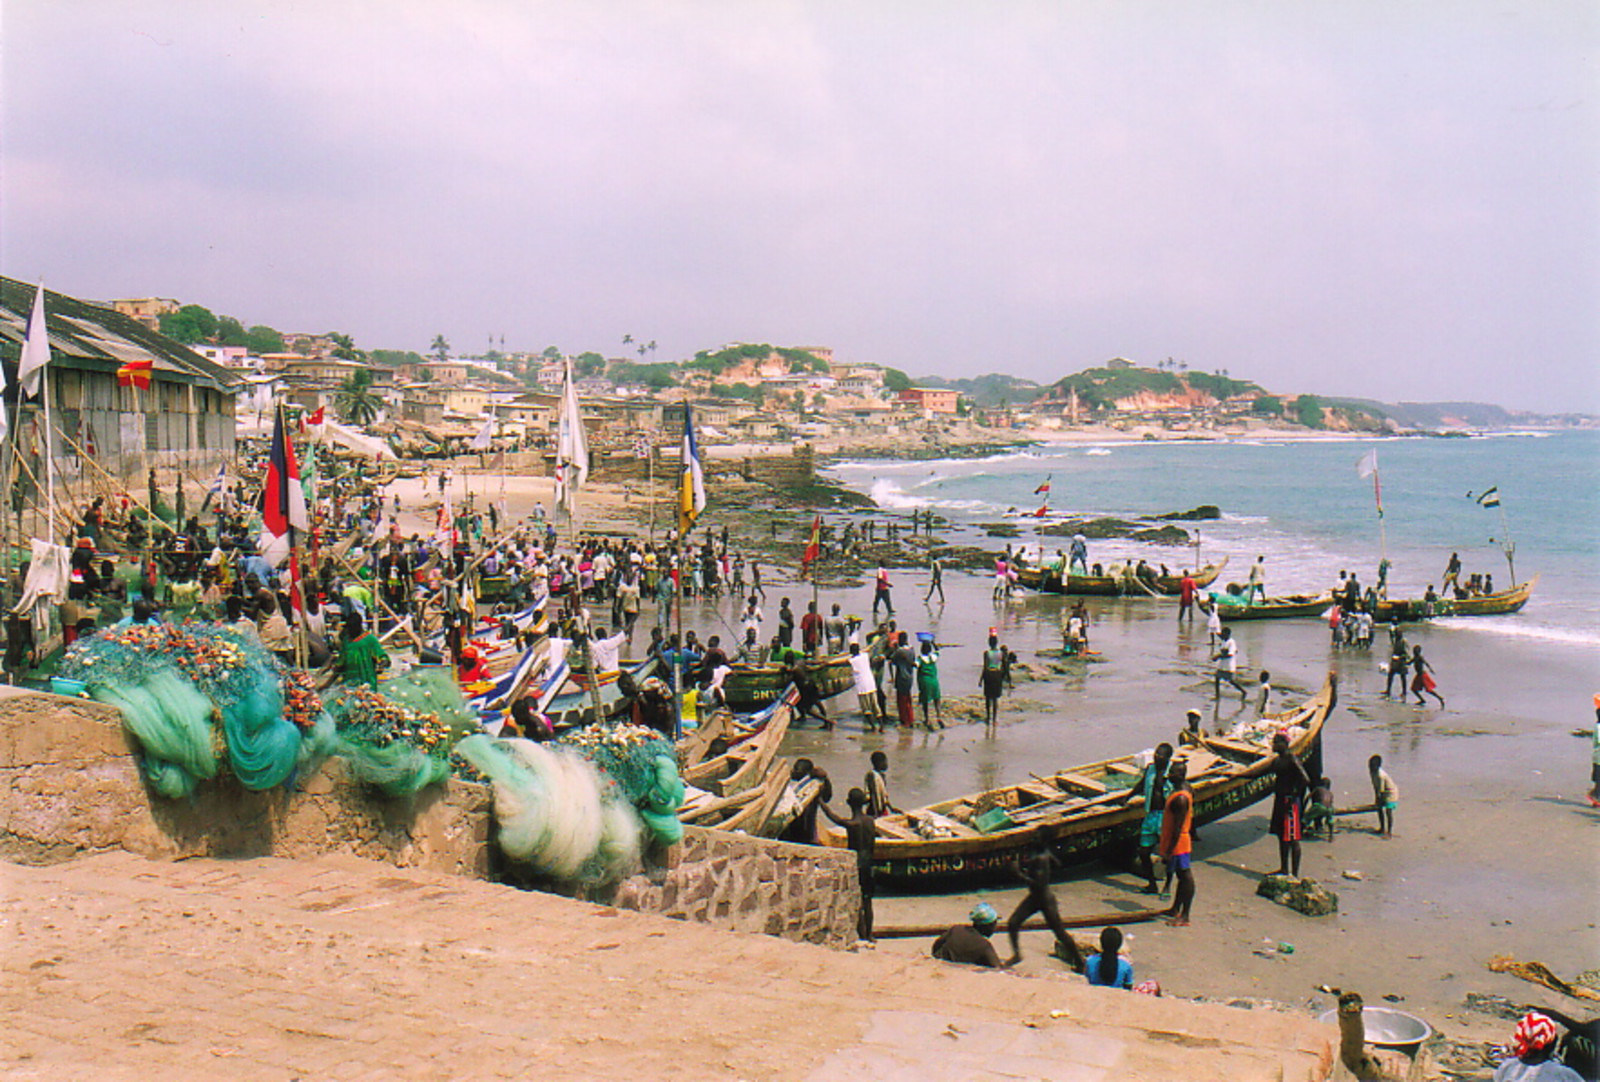 The steps from Cape Coast Castle onto the beach